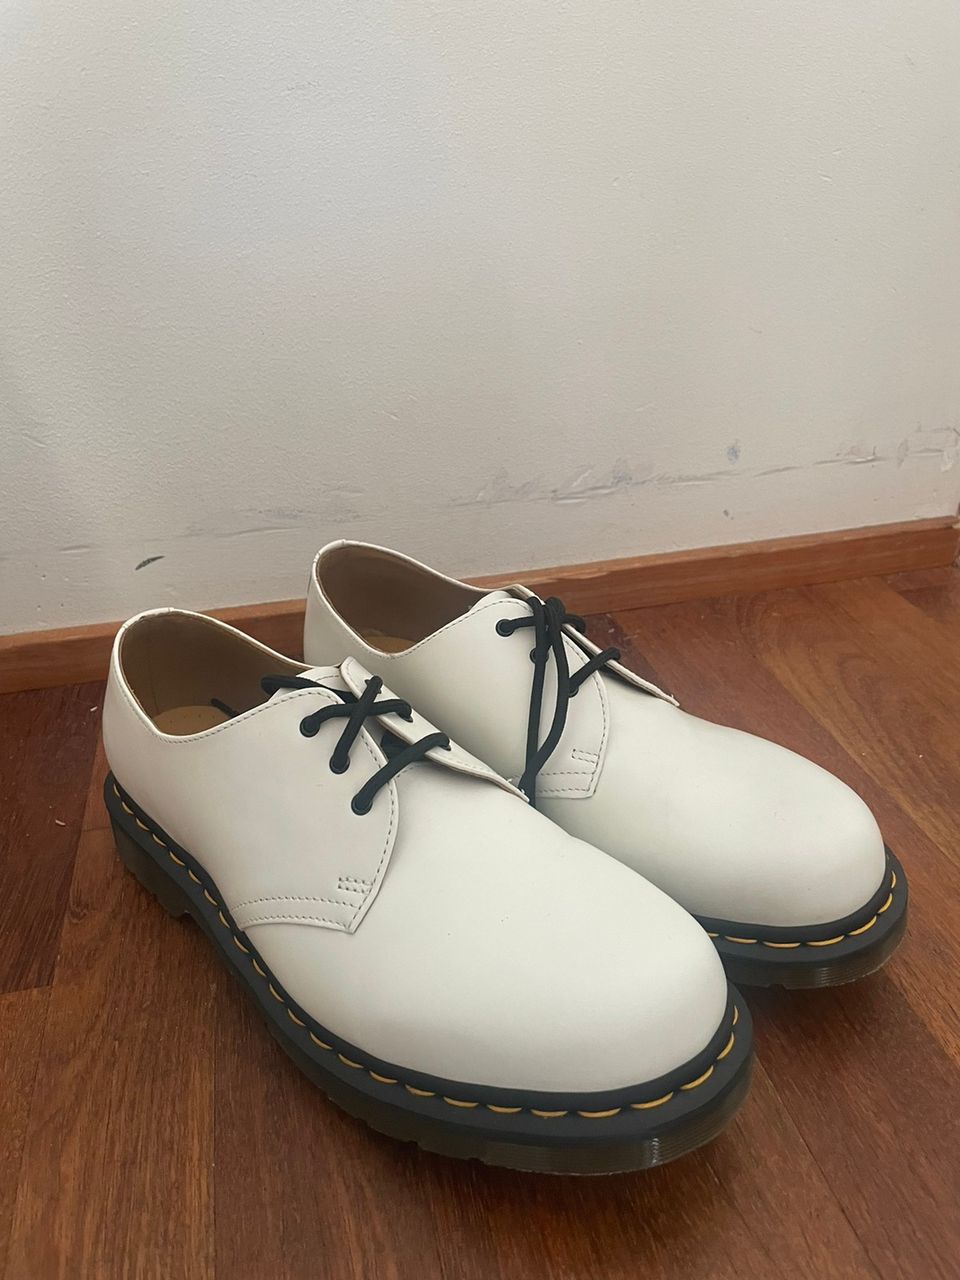 Dr Martens 1461 Smooth Oxford